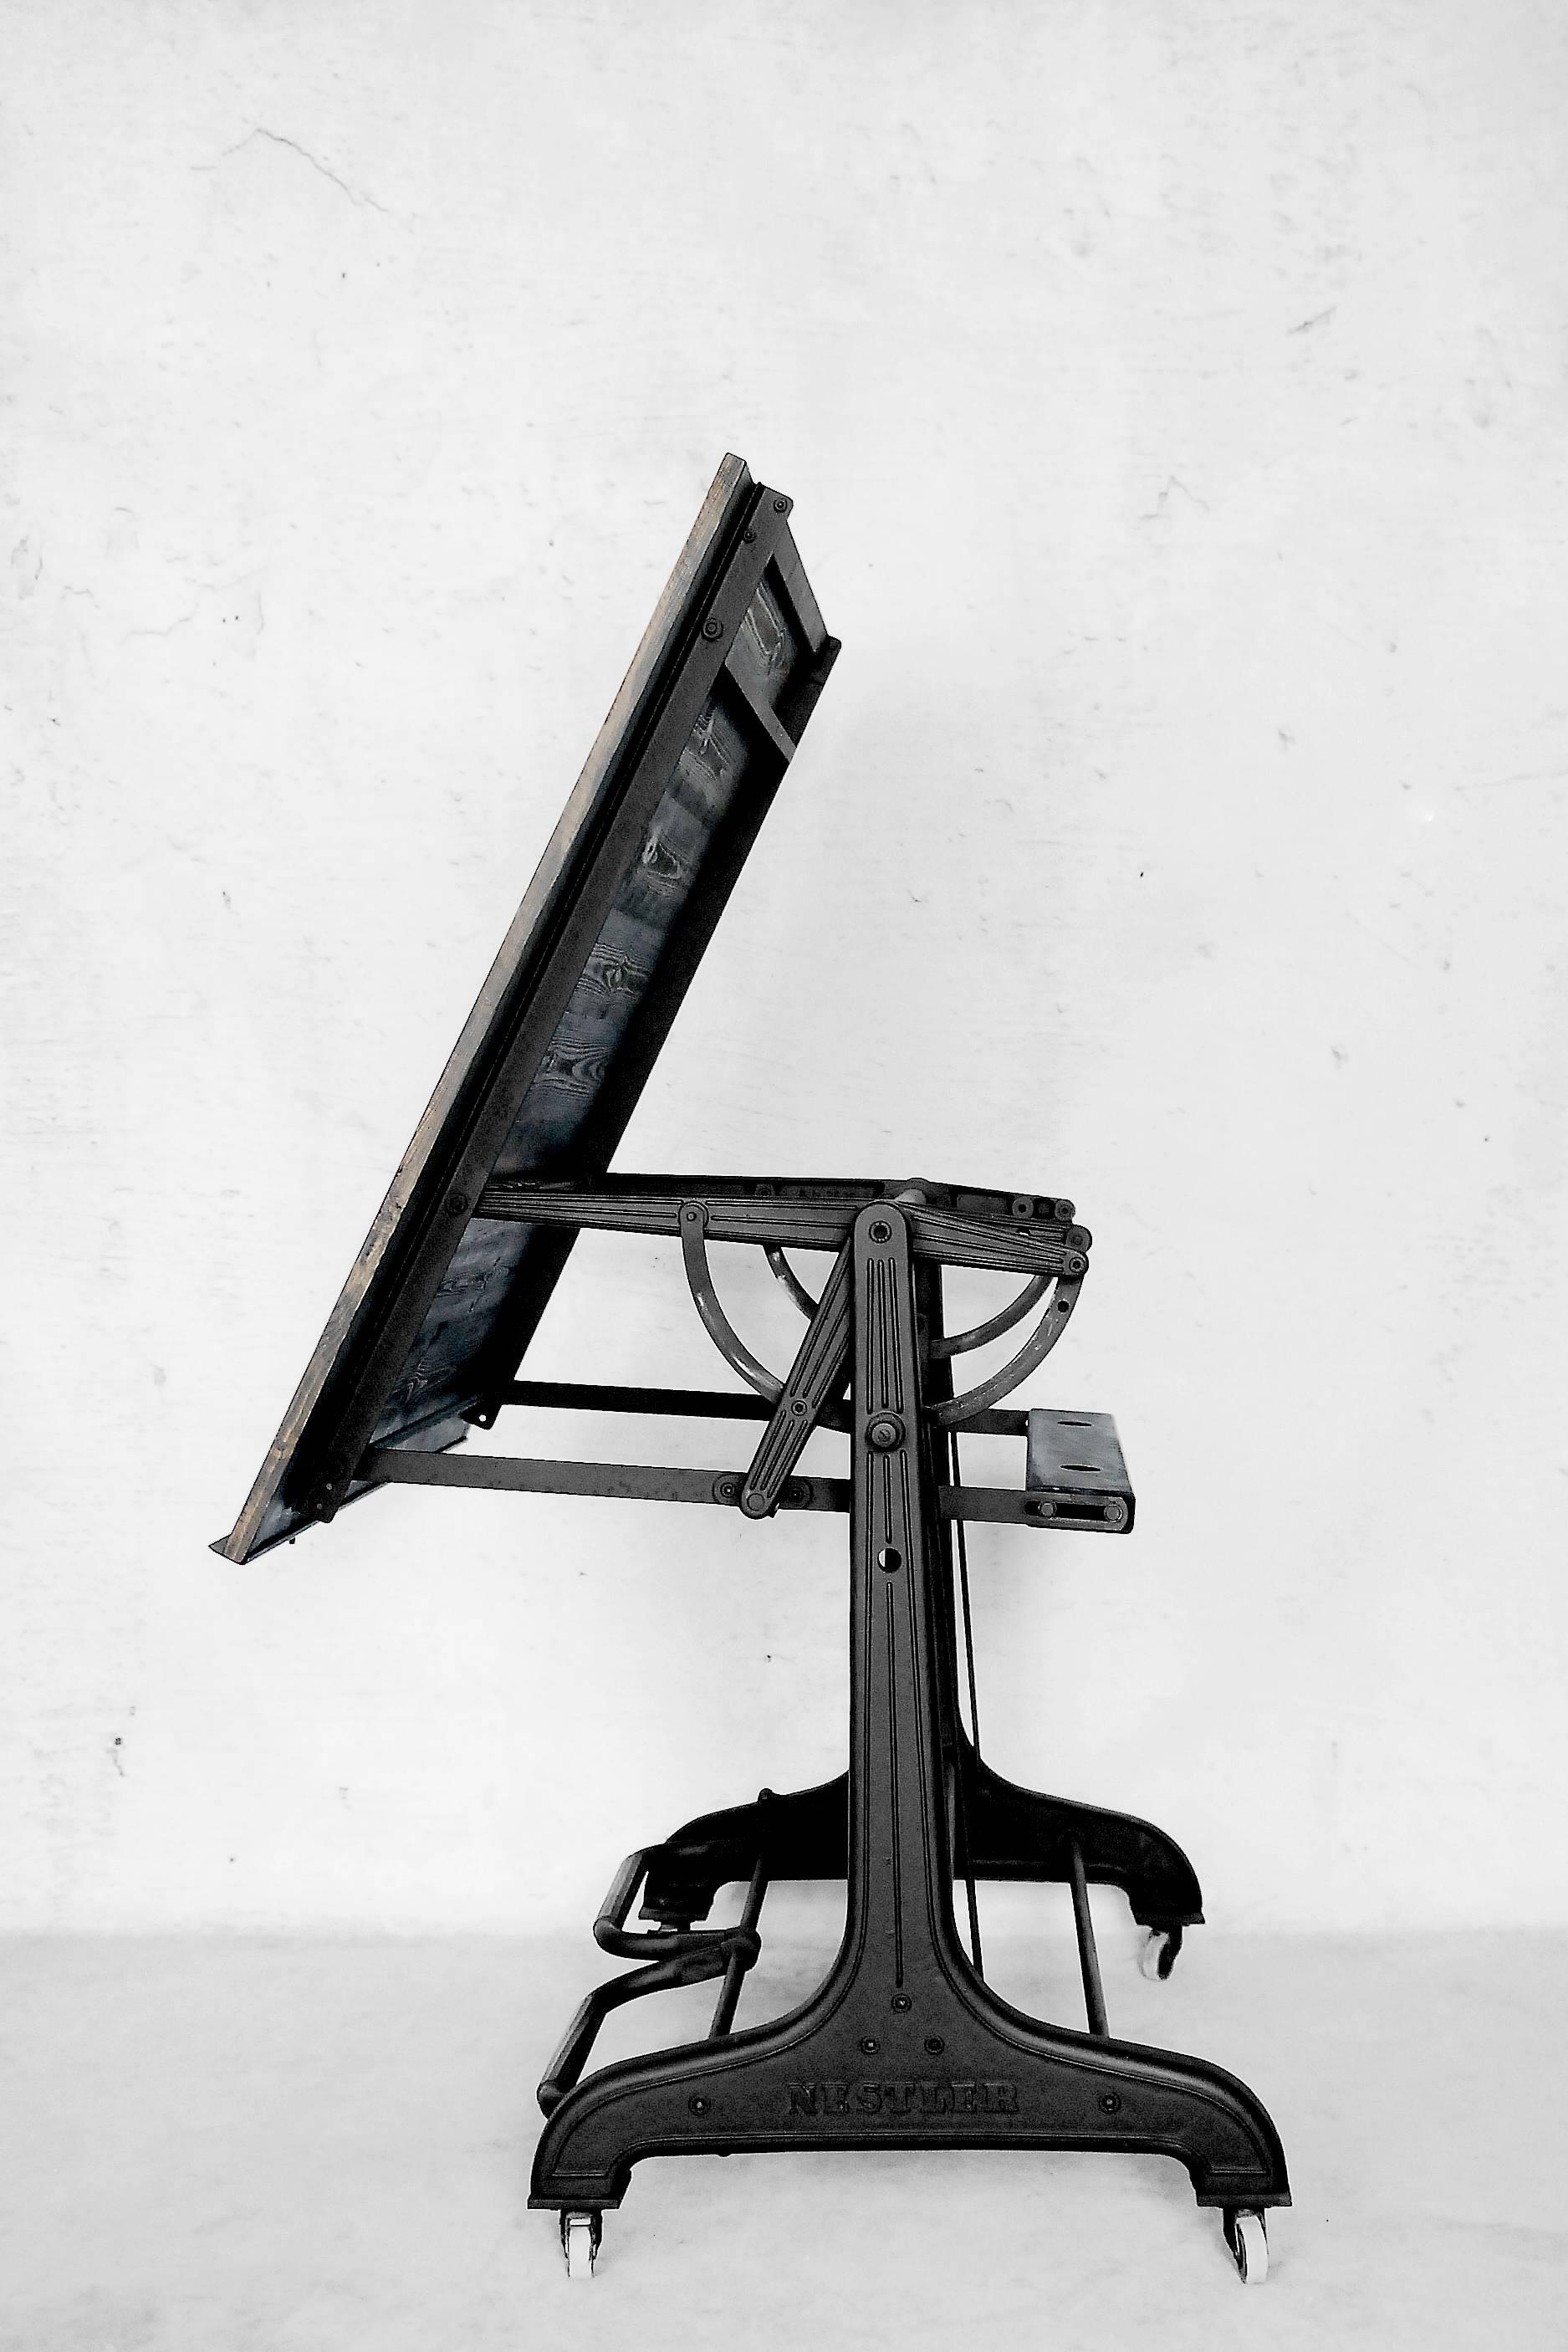 This drawing table was manufactured in Germany and designed by Nestler during the 1930s. It has a vintage antique frame made from cast iron. The table is adjustable and can be put in any positions and secured in that particular position; two pedals